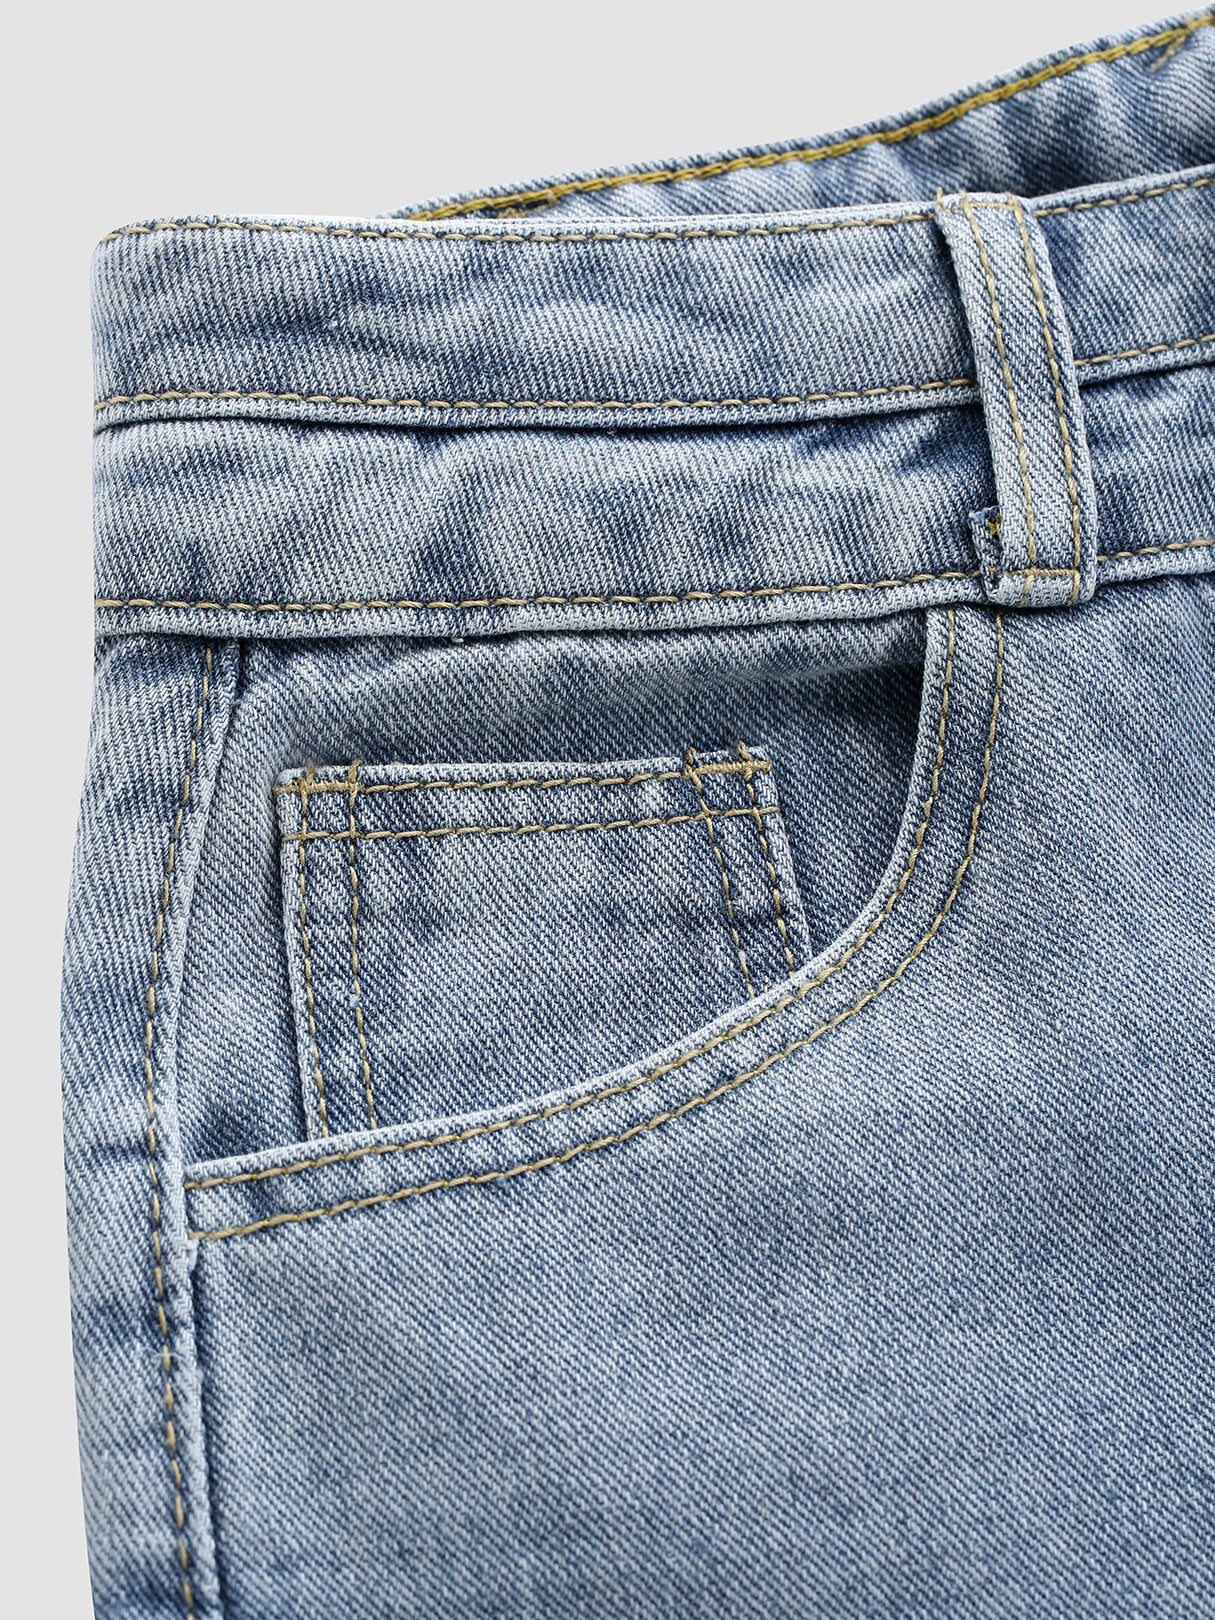 Solid Hollow-out Button Cotton Jeans